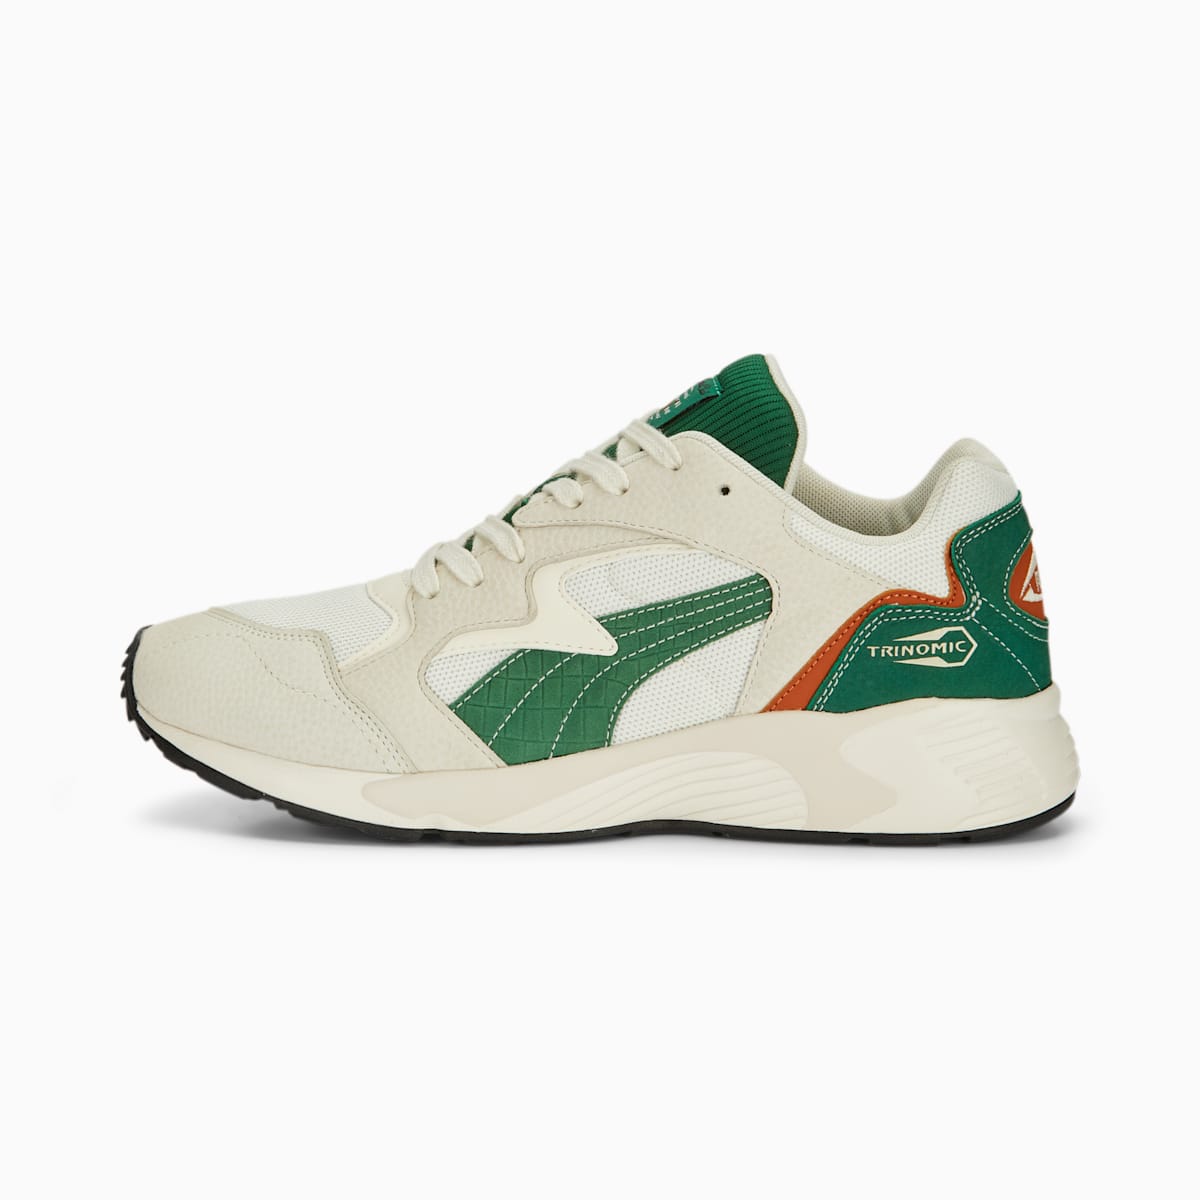 Prevail Fast Green Sneakers